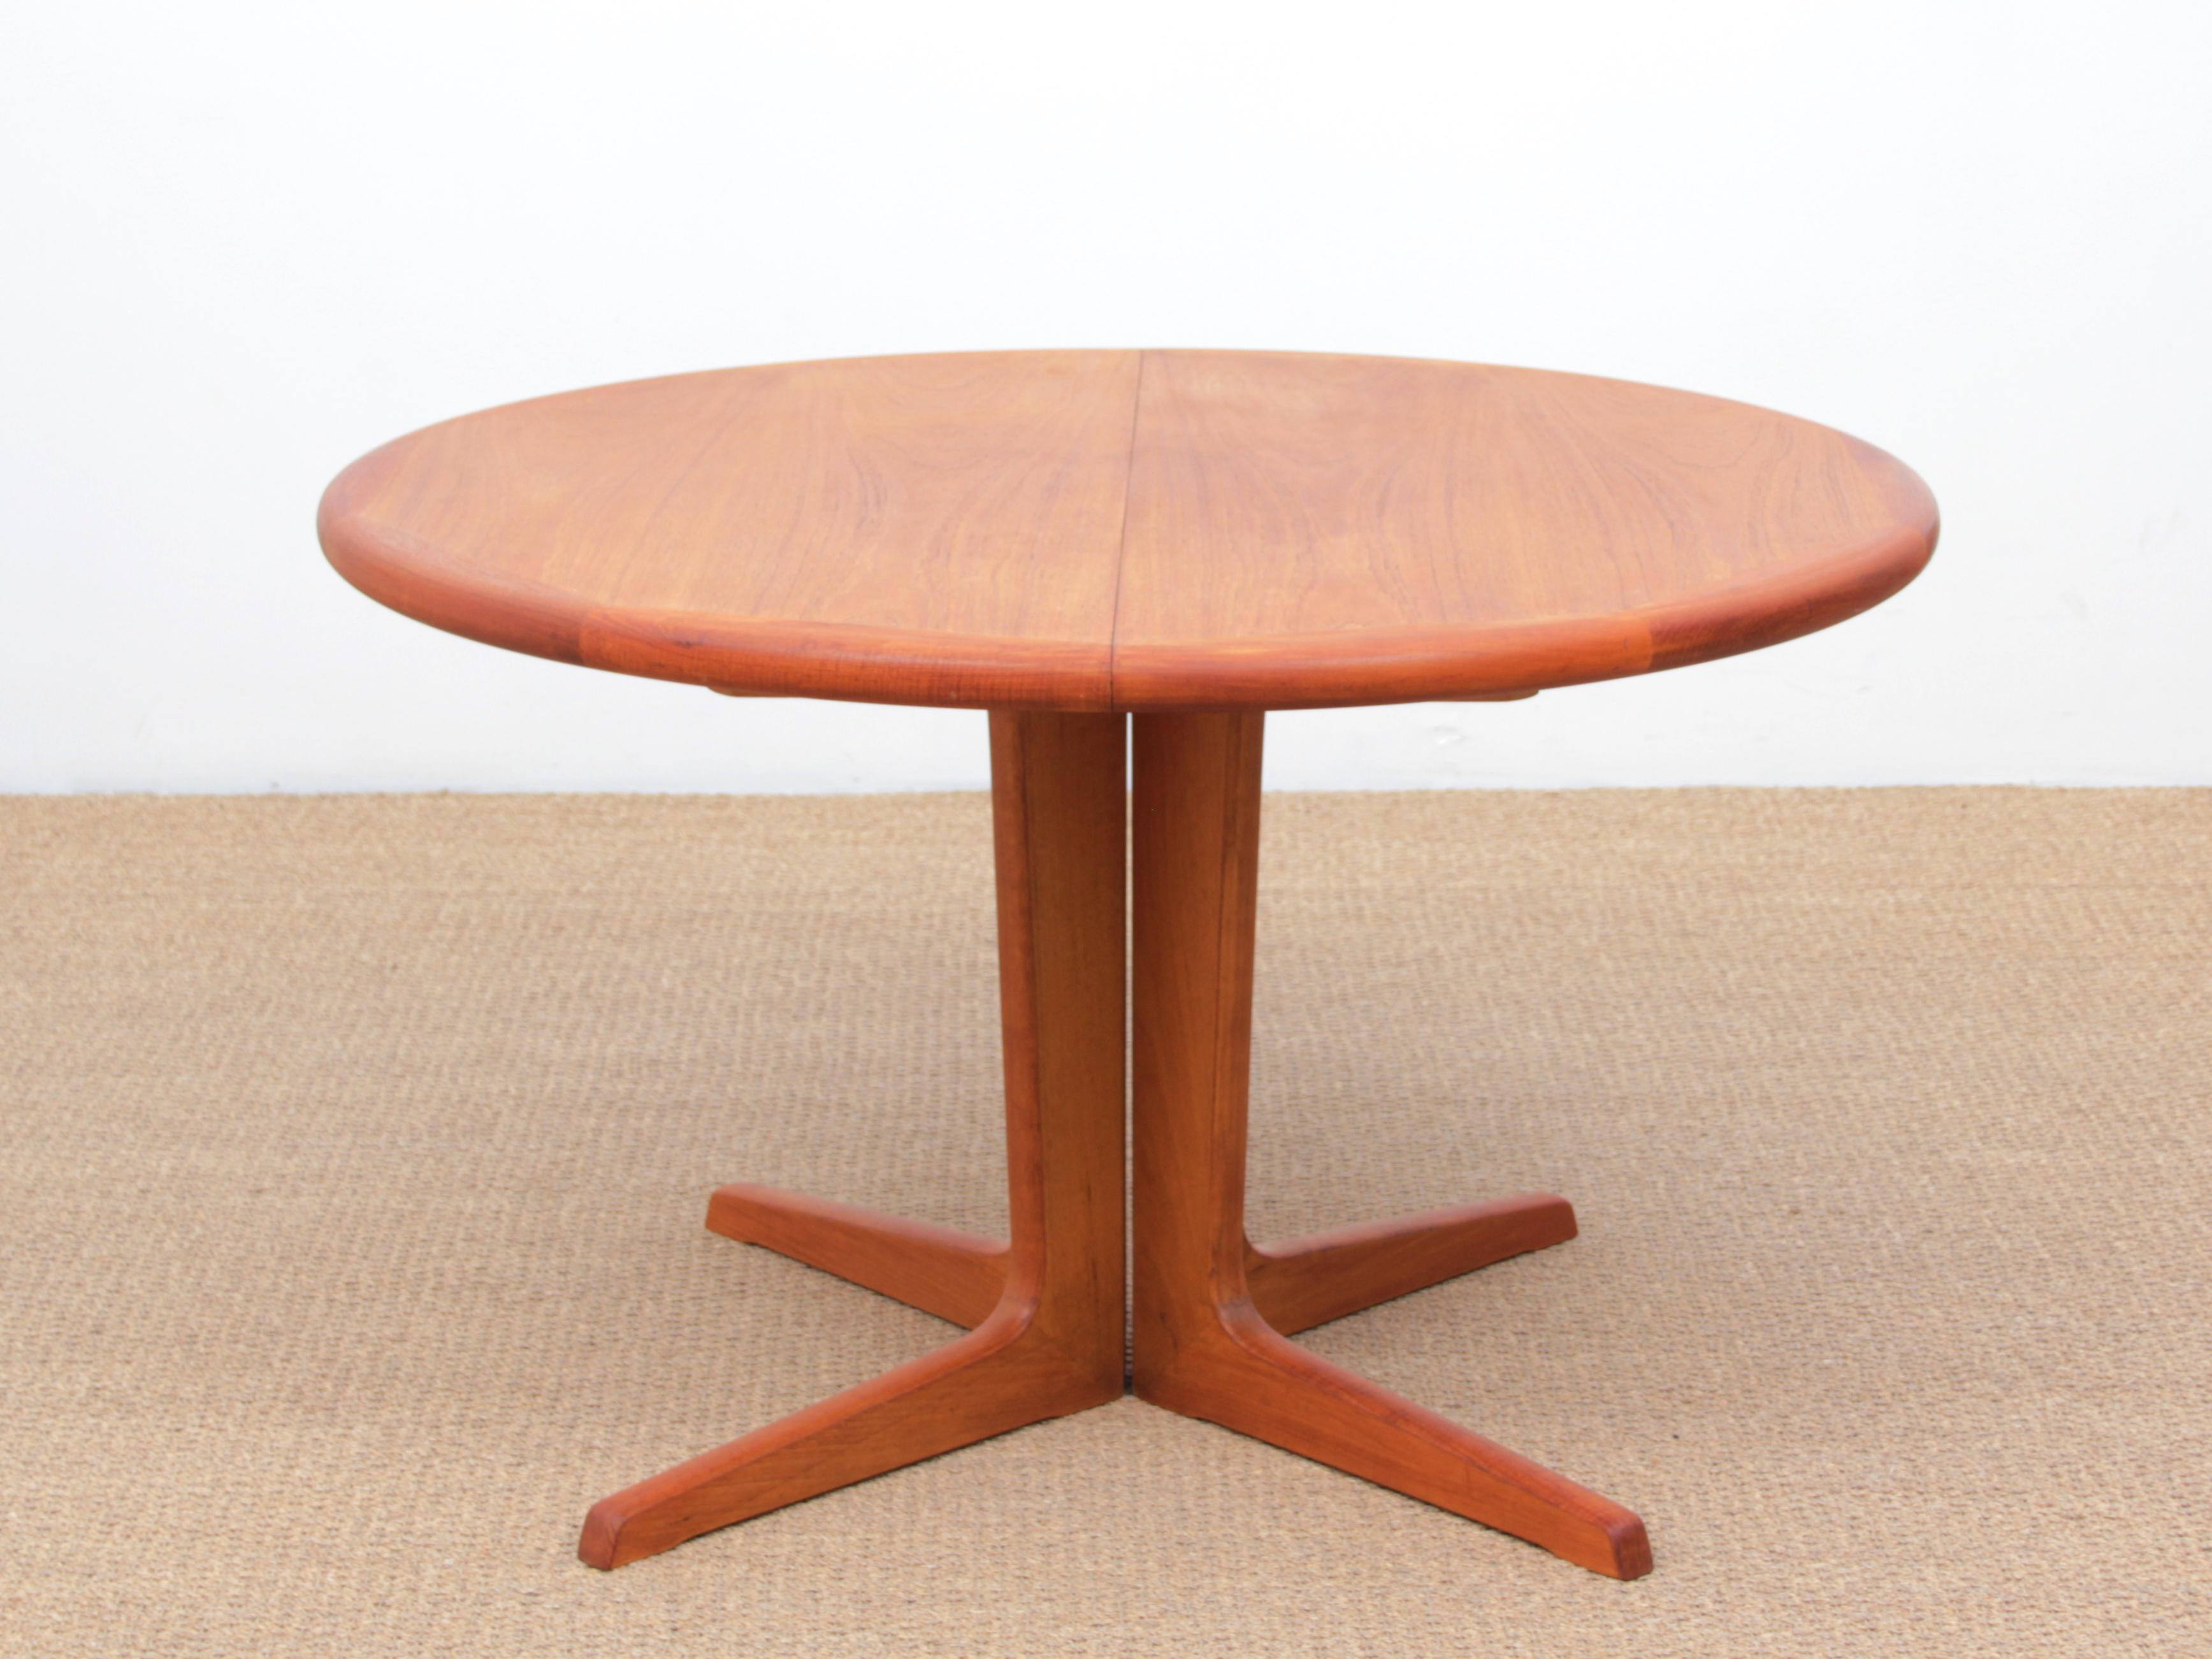 Mid-Century Modern Scandinavian round dining table in teak 6/10 seat. Come with 2 extra leaves. Central leg.